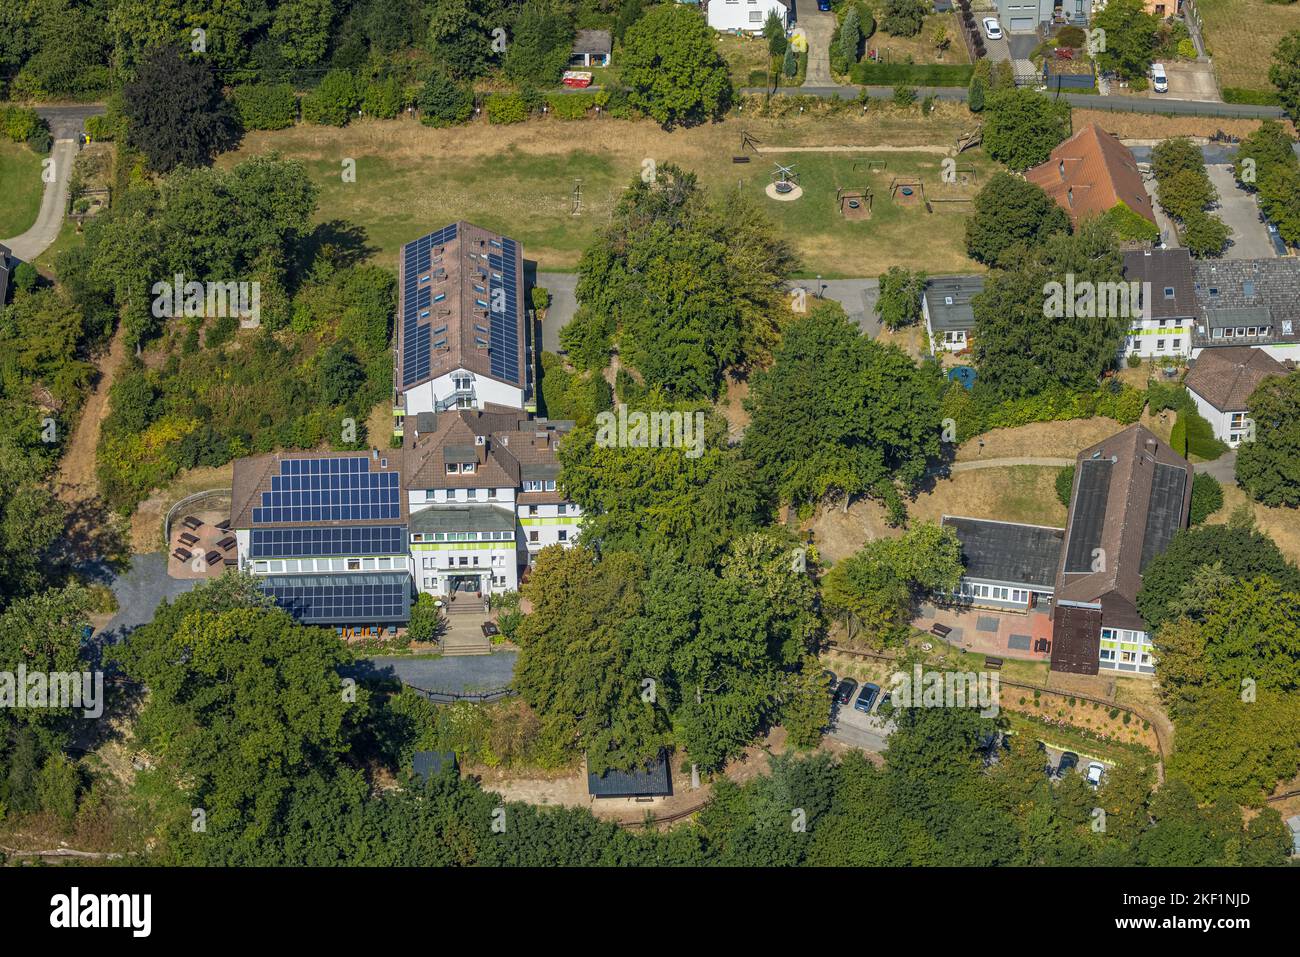 Aerial view, Haus Friede - EC guesthouse and conference center, solar roof, Oberbredenscheid, Hattingen, Ruhr area, North Rhine-Westphalia, Germany, D Stock Photo